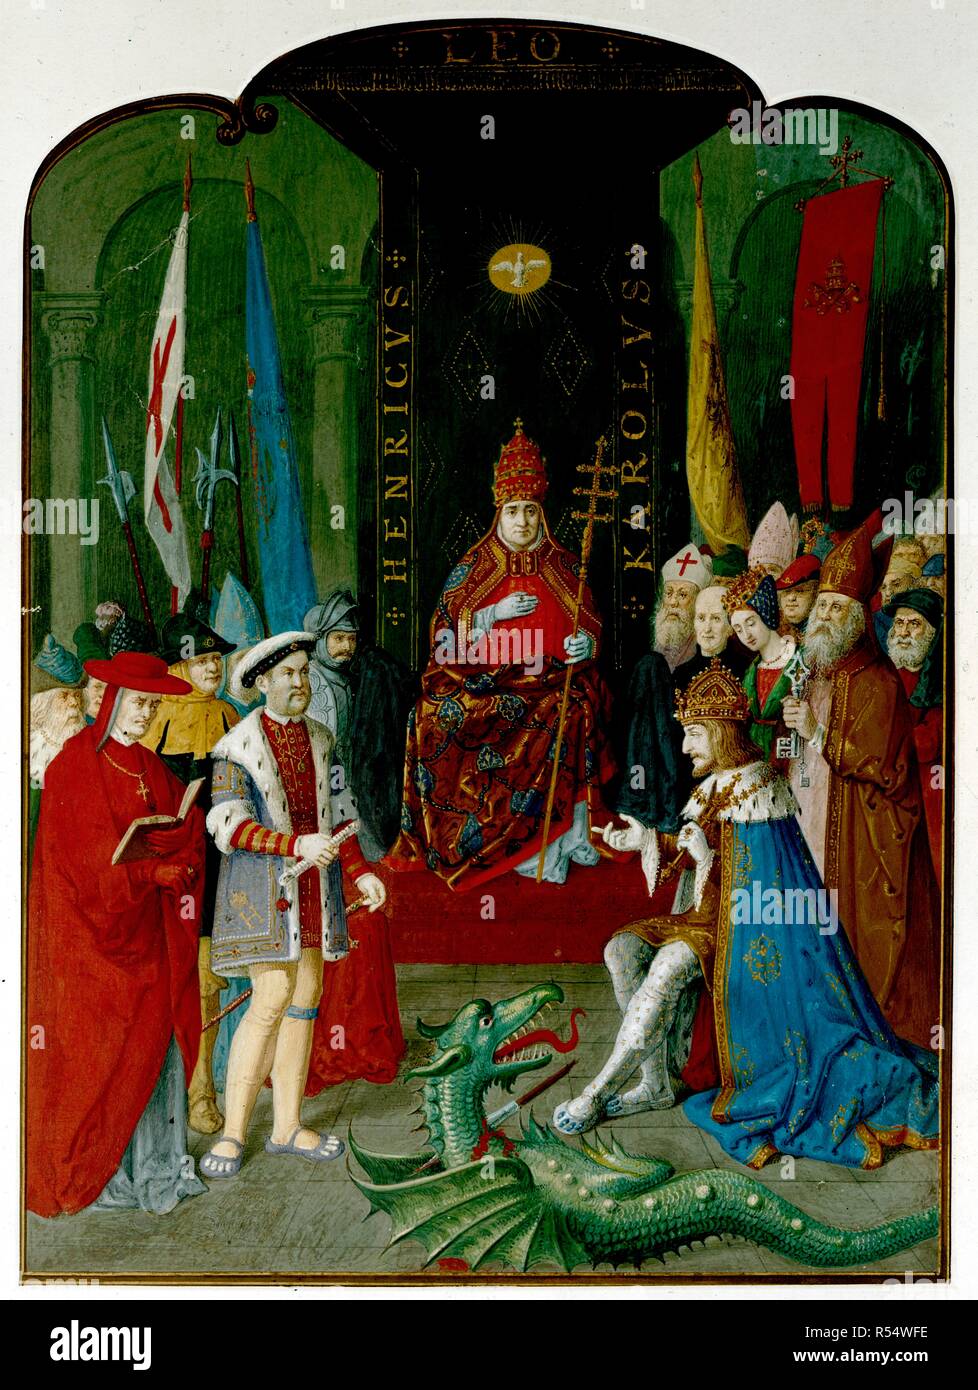 Henry VIII, Charles V and Leo X. Italy; early 16th century. (Whole cutting) King Henry VIII disputing with the Emperor Charles V before Pope Leo X. Henry holds a roll, which may be the bull of 1521 granting him the title 'Defender of the Faith'. He is supported by a cardinal, possibly Wolsey, who holds an open book. In the foreground is a dragon transfixed by a spear-head.  Originally published/produced in Italy; early 16th century. . Source: Add. 35254 S,. Stock Photo